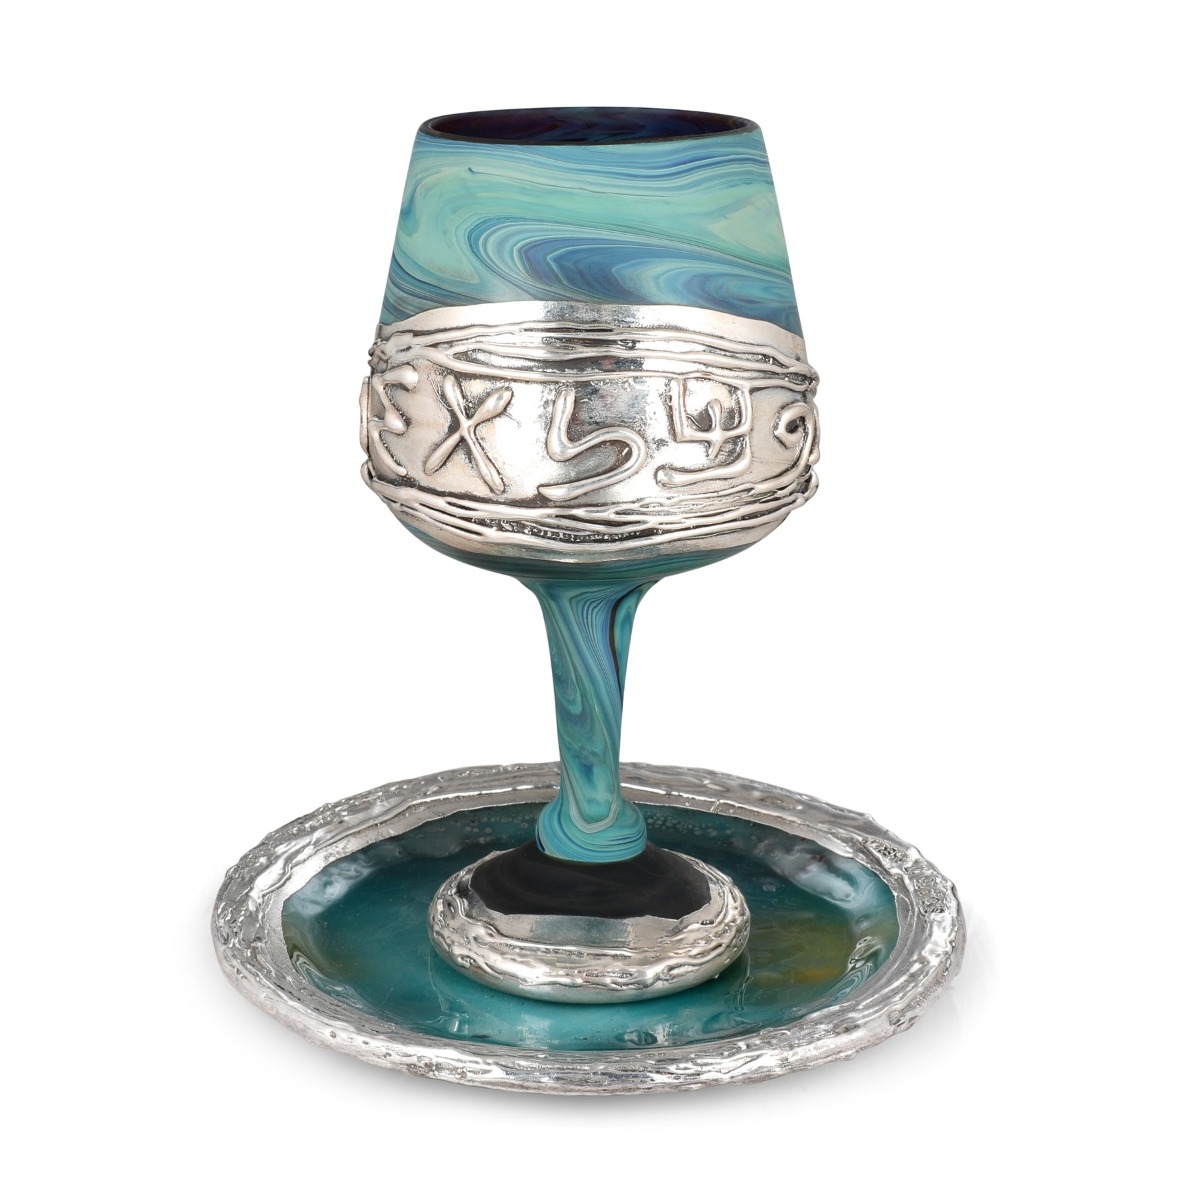 Deluxe Handmade Ceramic and Sterling Silver-Plated Kiddush Cup With Ancient Hebrew Design - 3